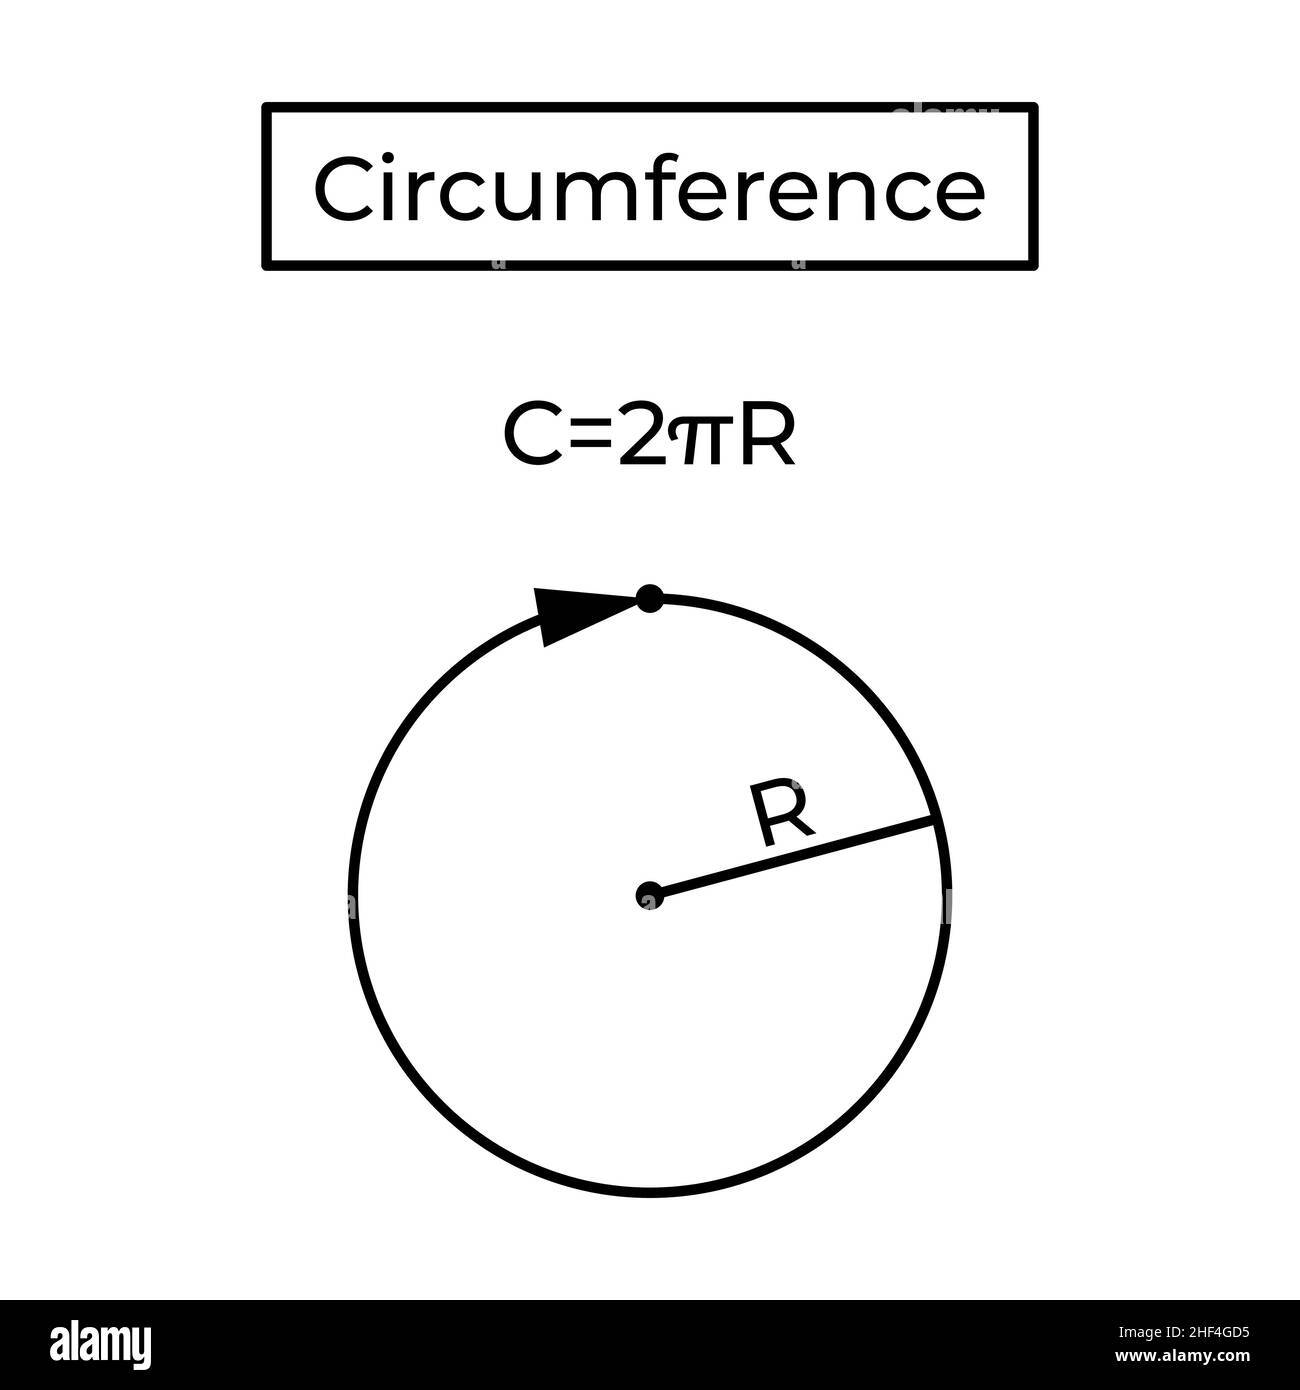 Circumference and formula. Stock Vector